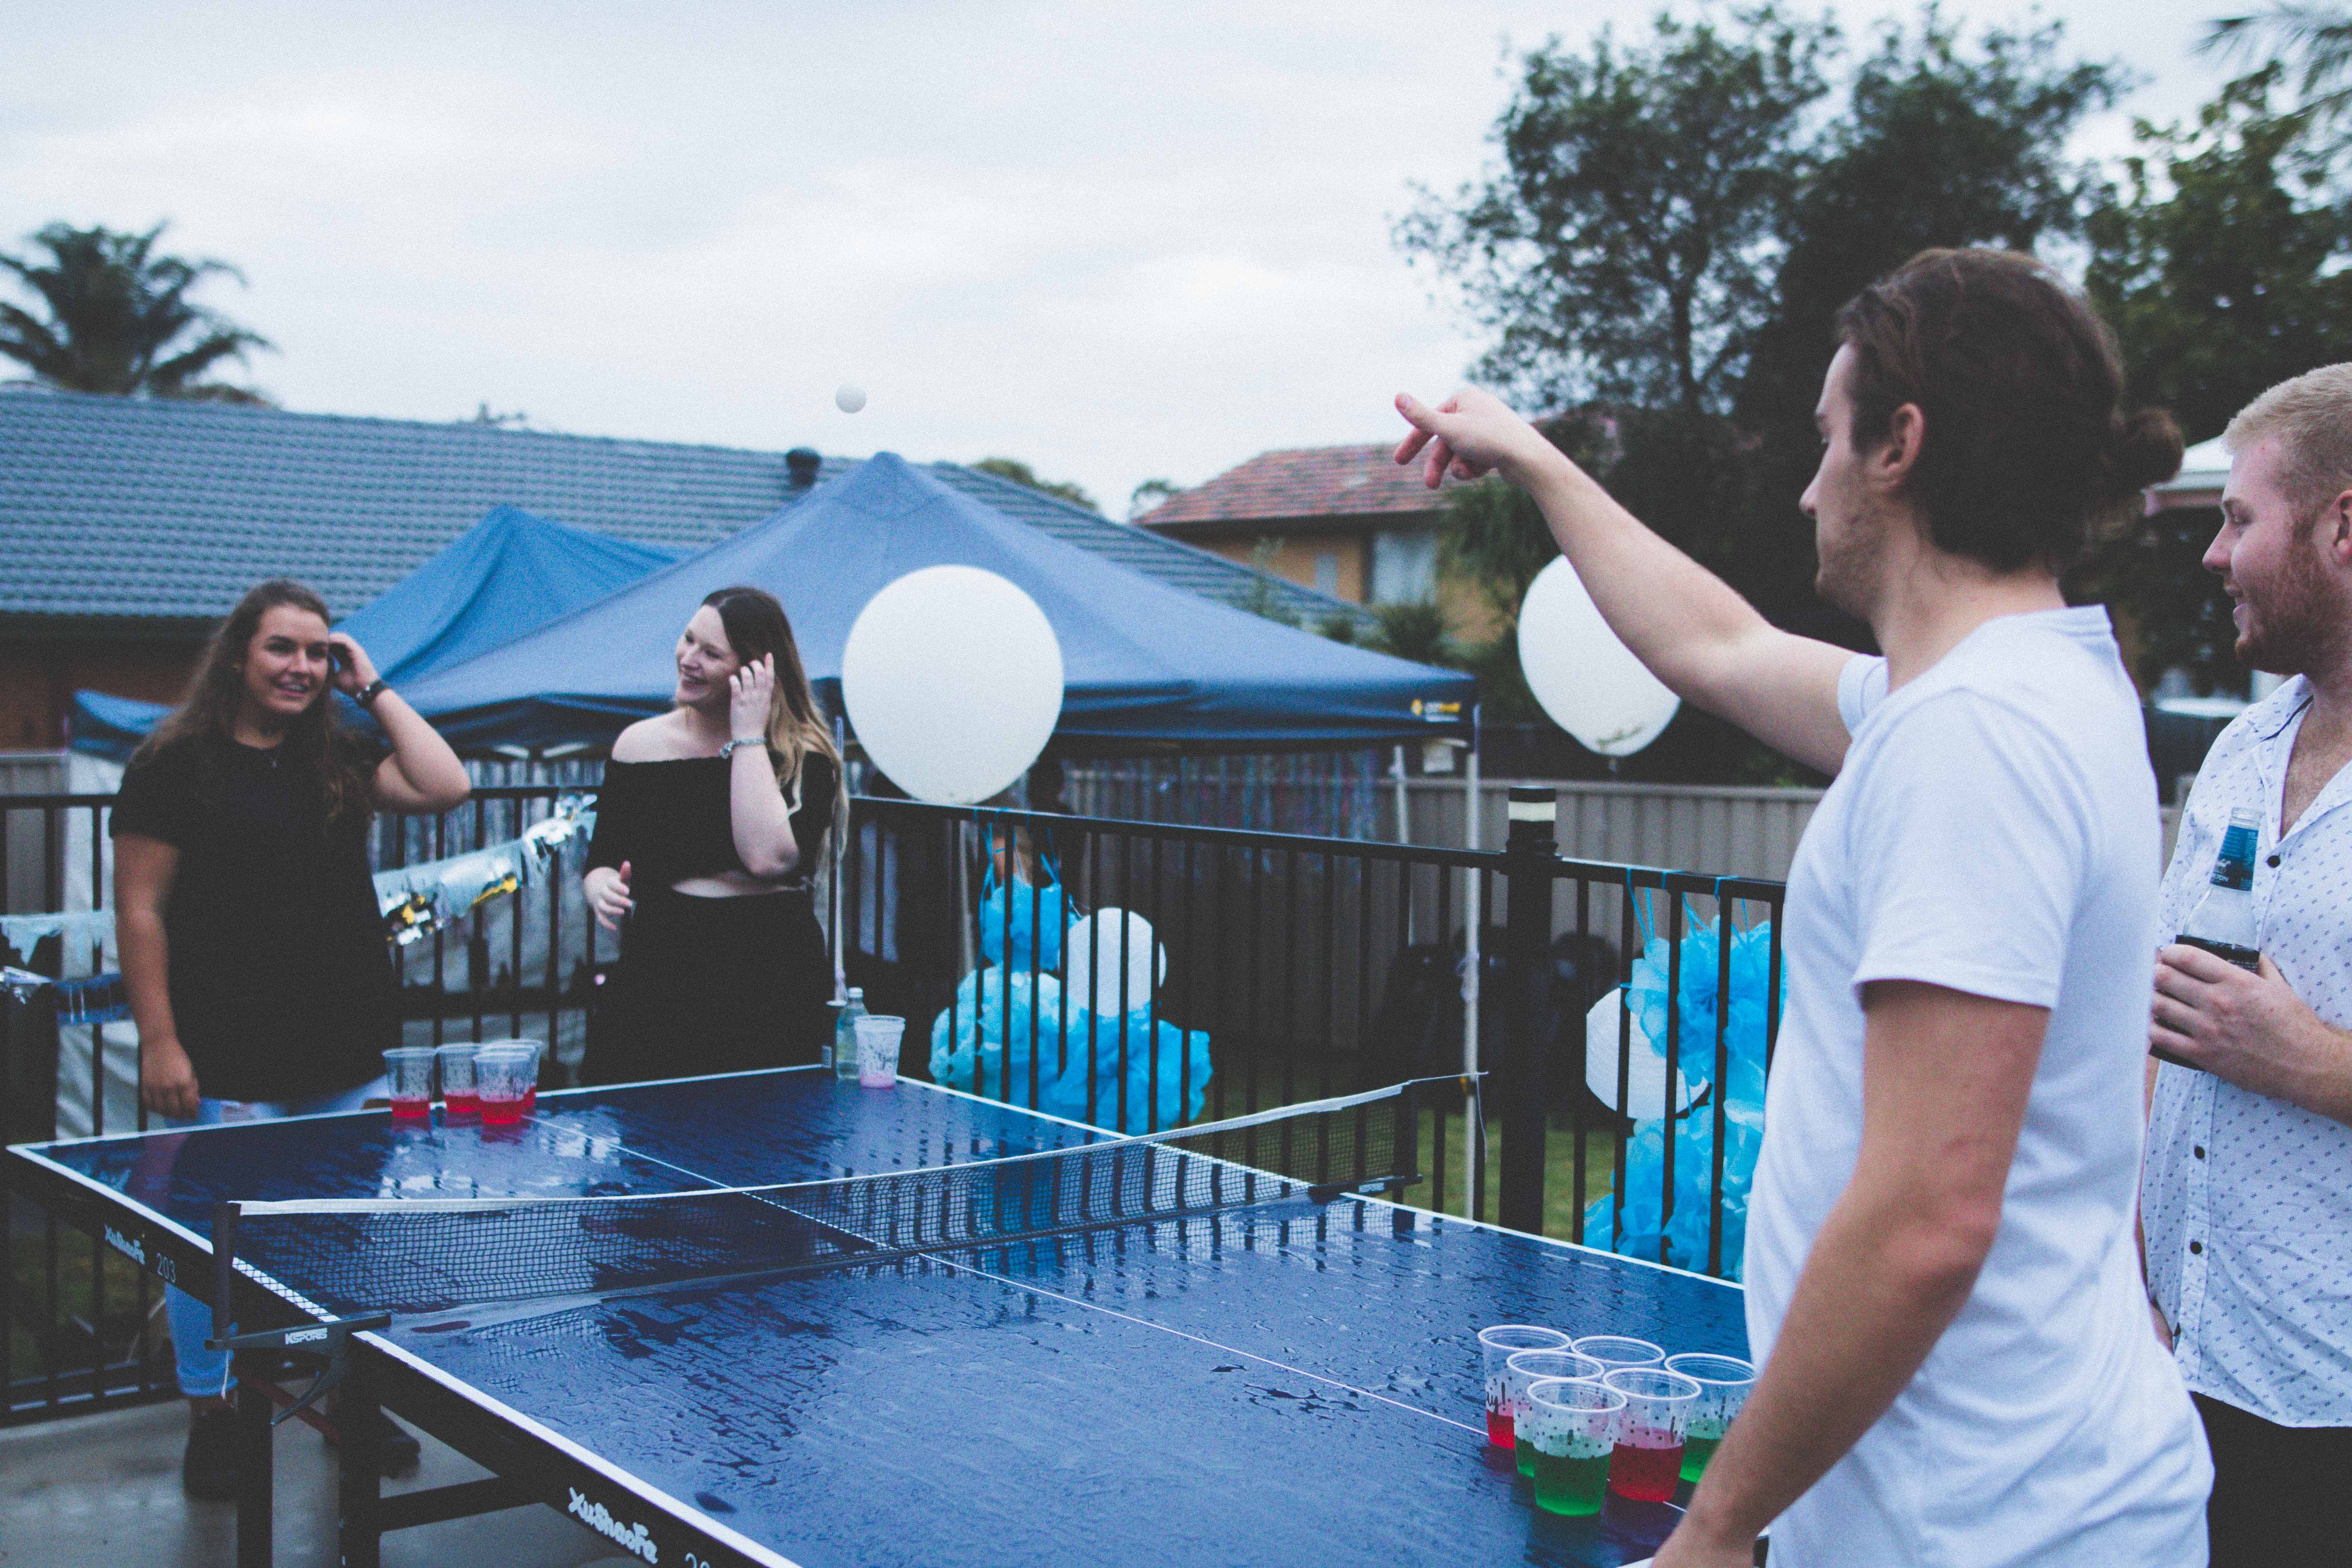 CANCELLED - IDA beer pong turnament